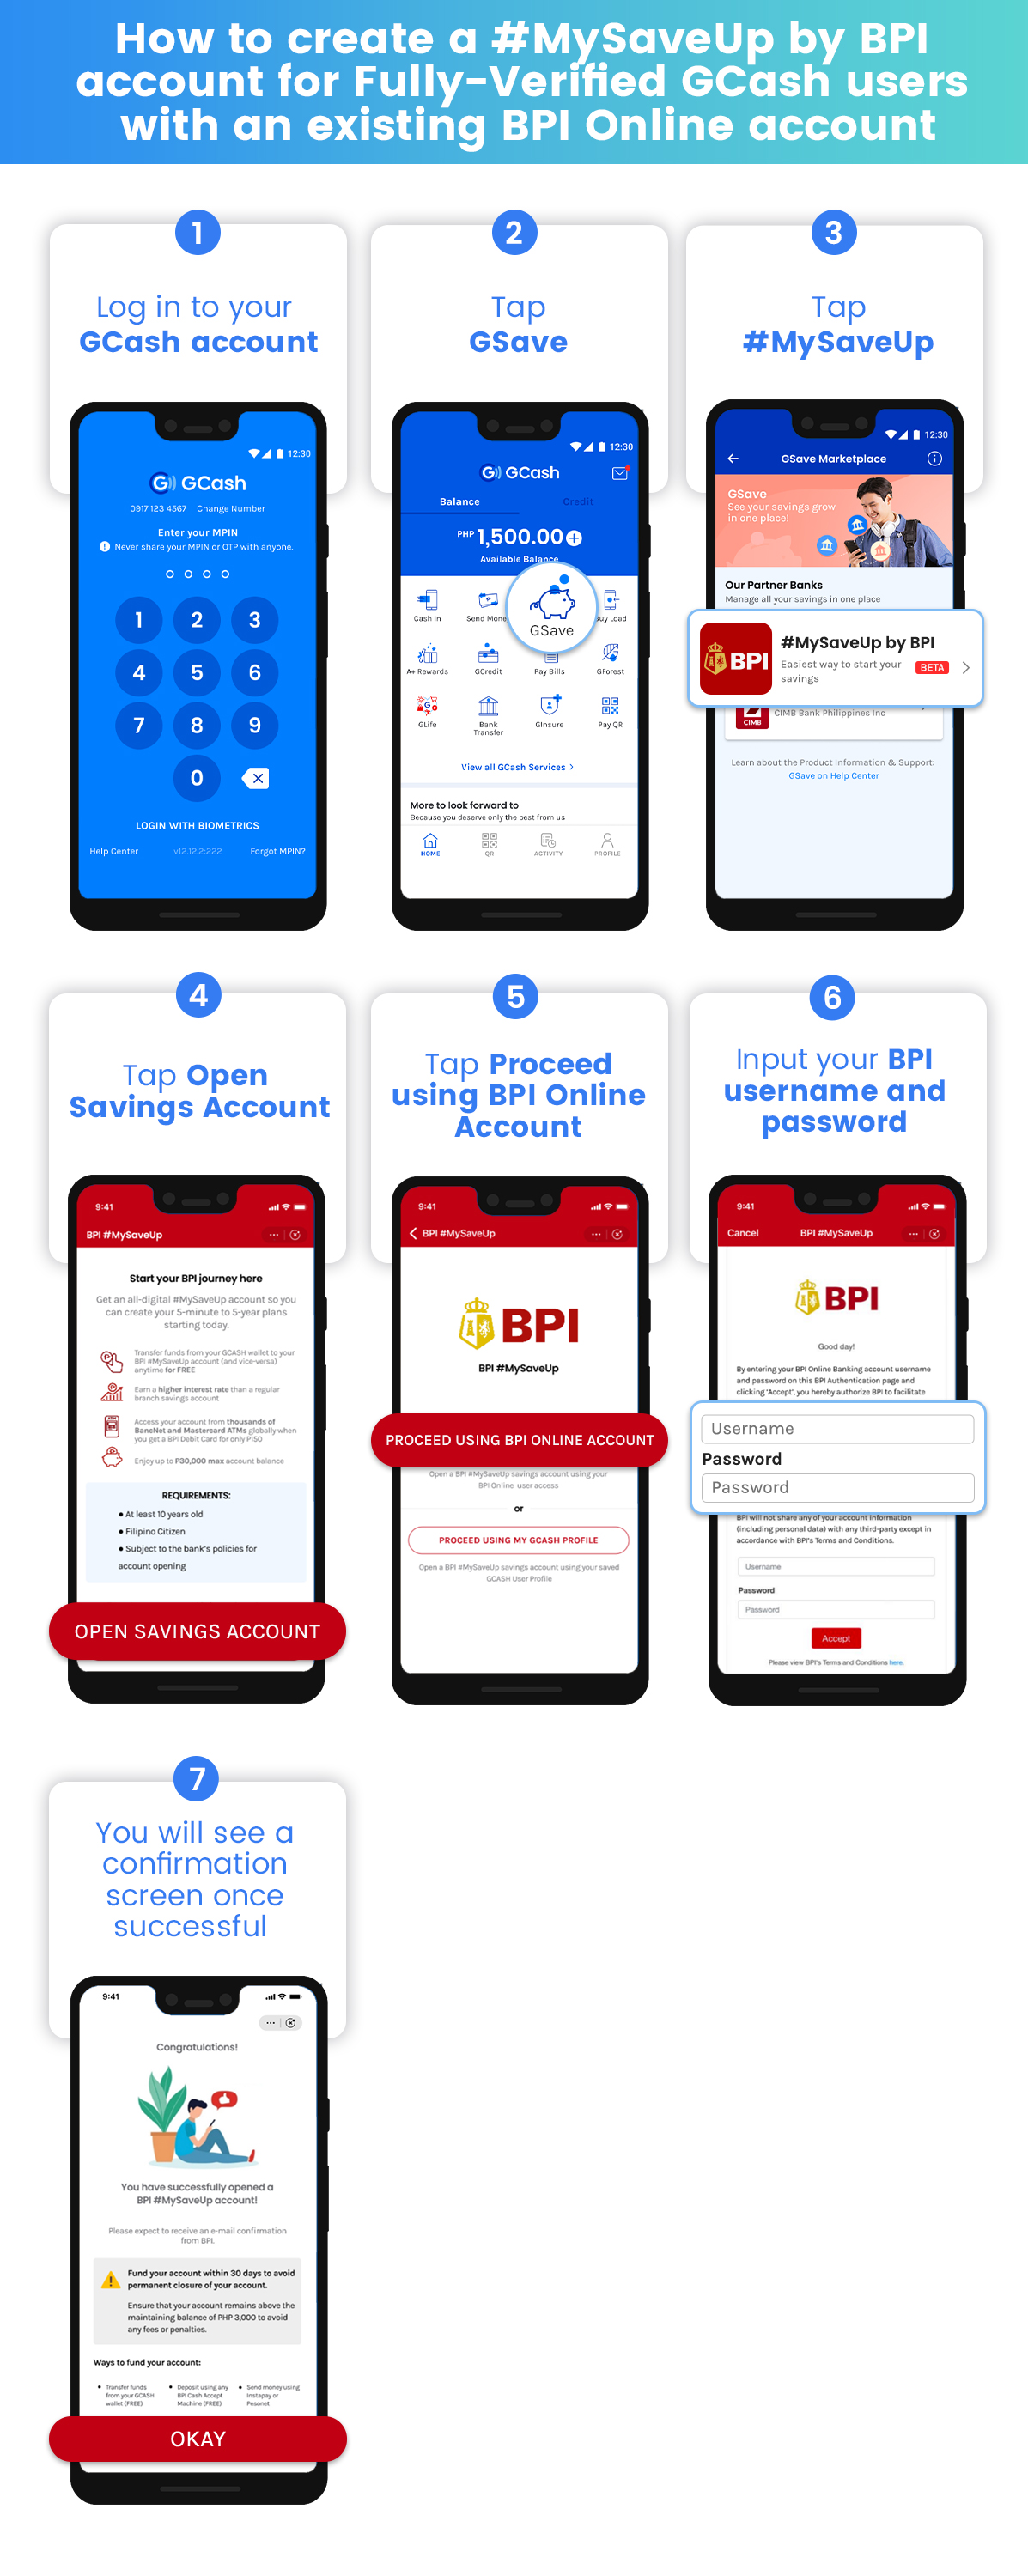 How_to_create_a__MySaveUp_by_BPI_account_for_Fully-Verified_GCash_users_with_an_existing_BPI_Online_account.jpg